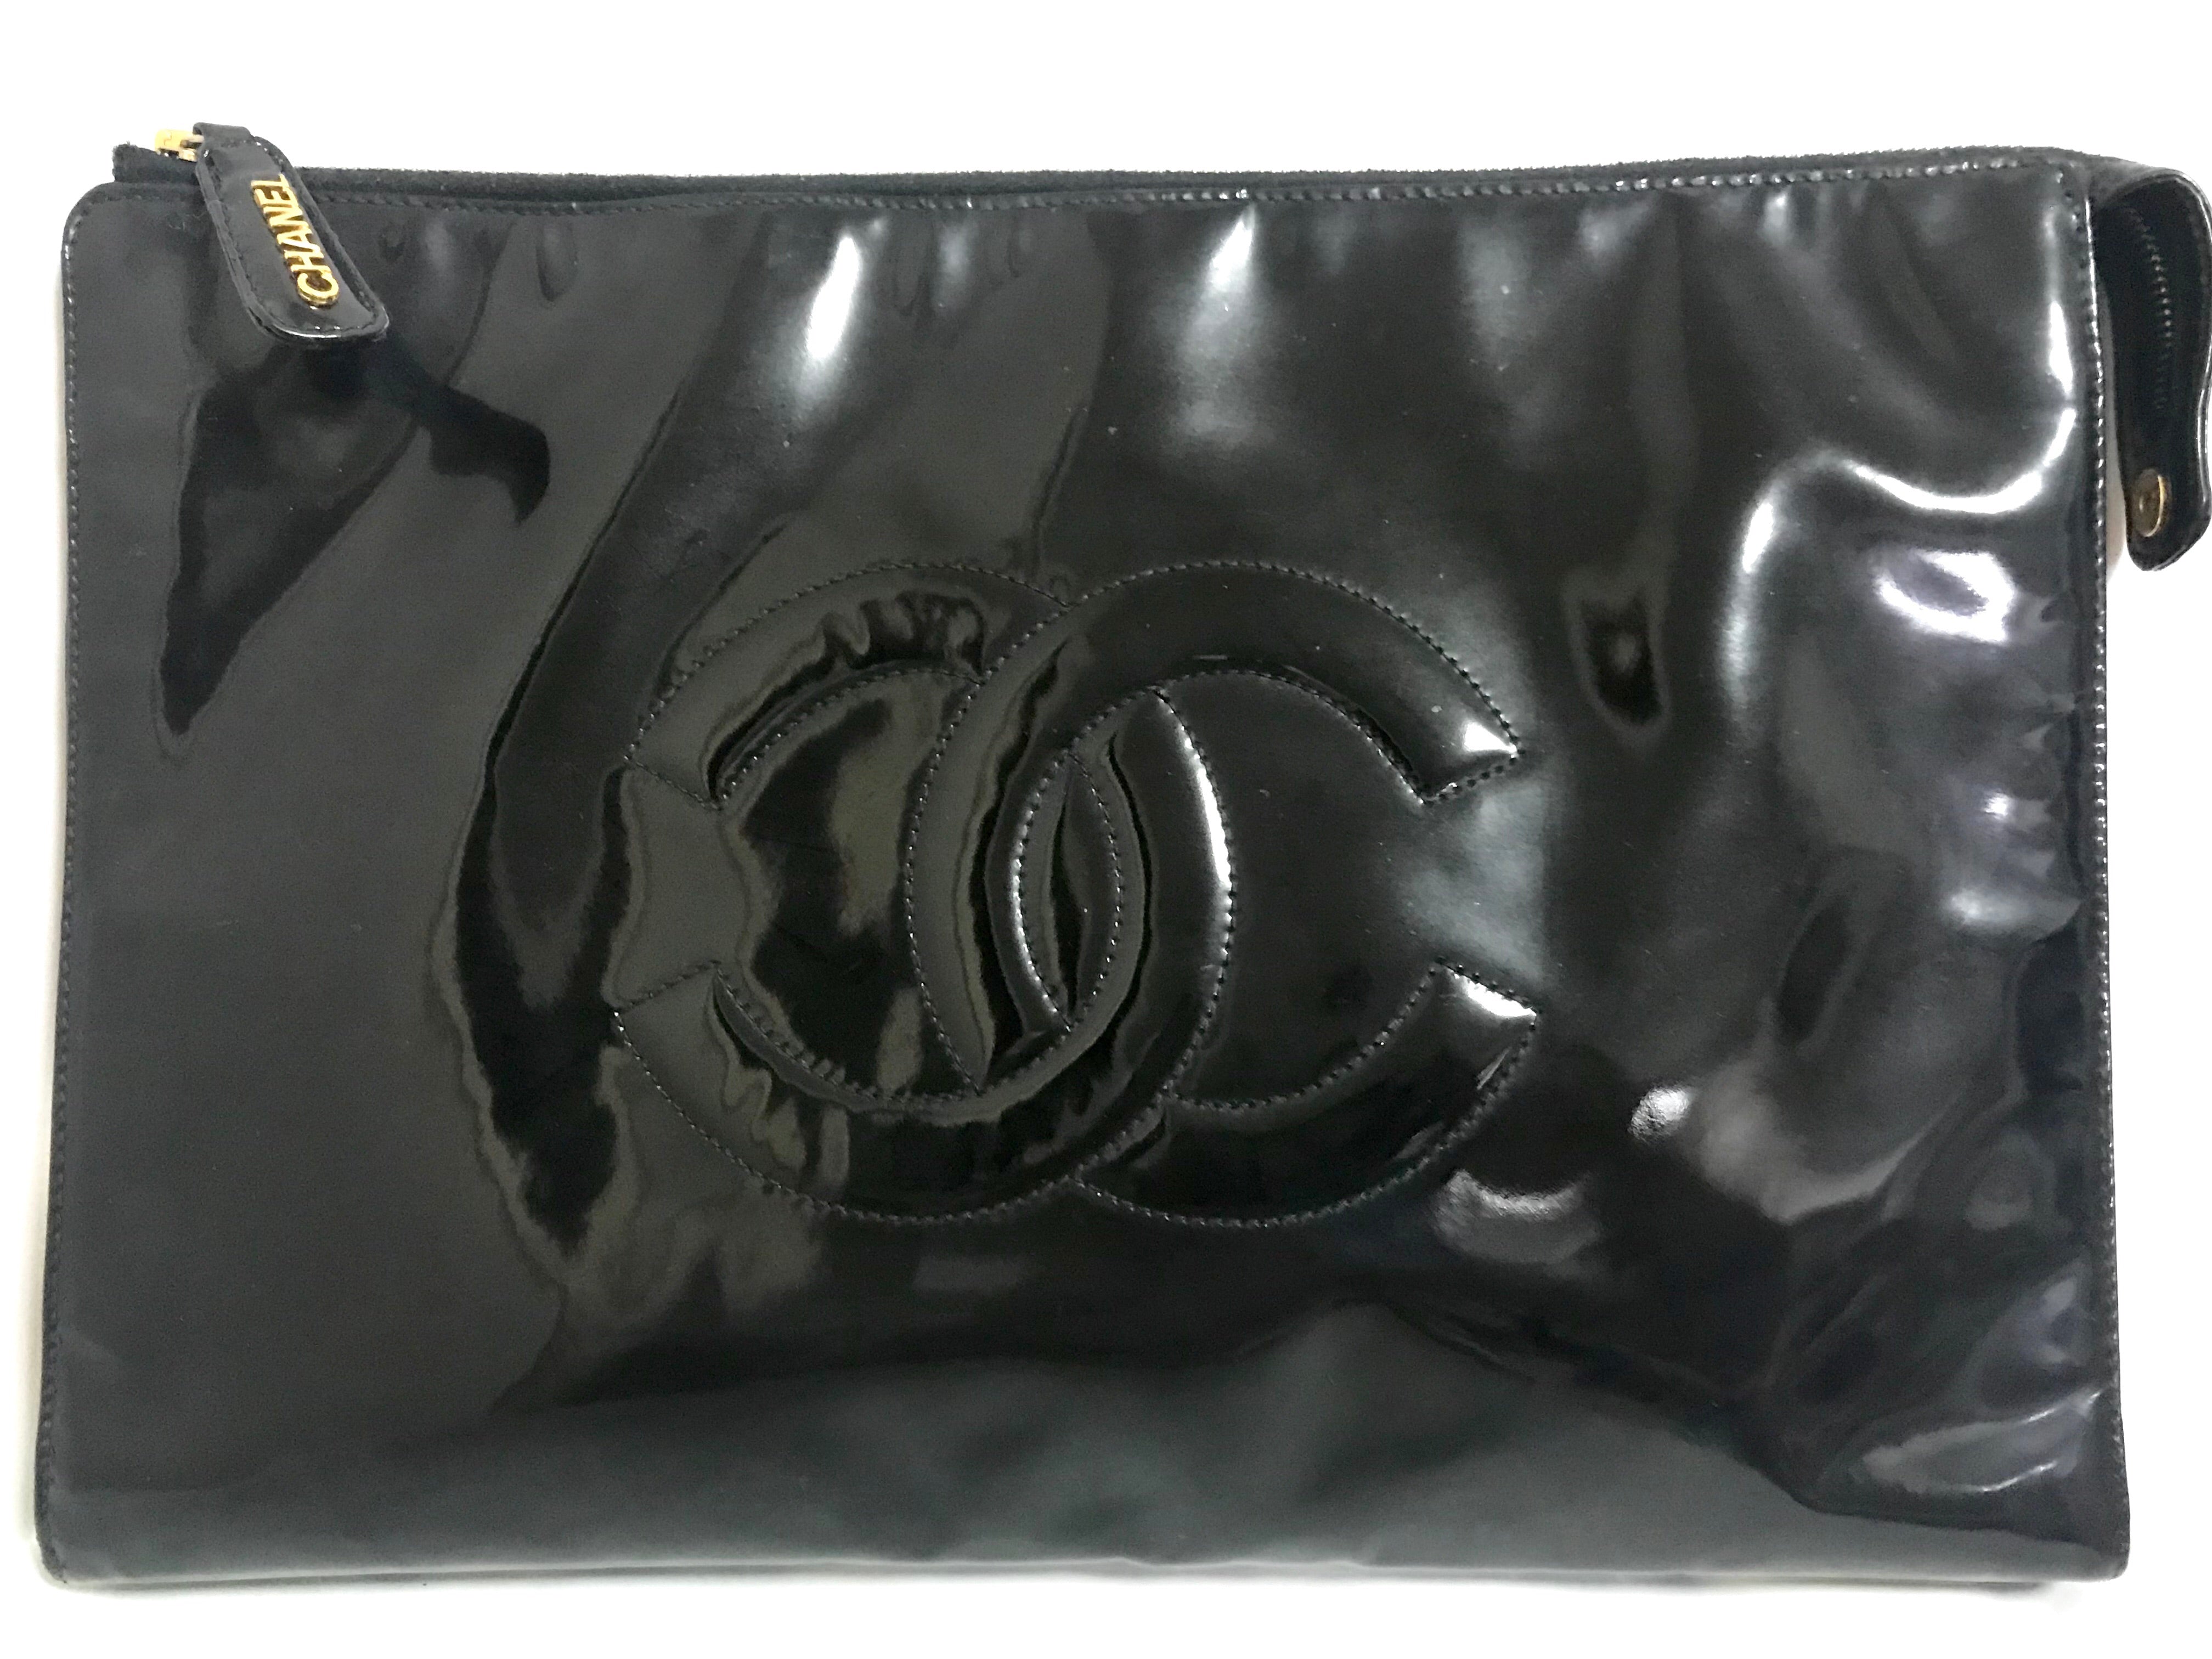 used black chanel bag authentic